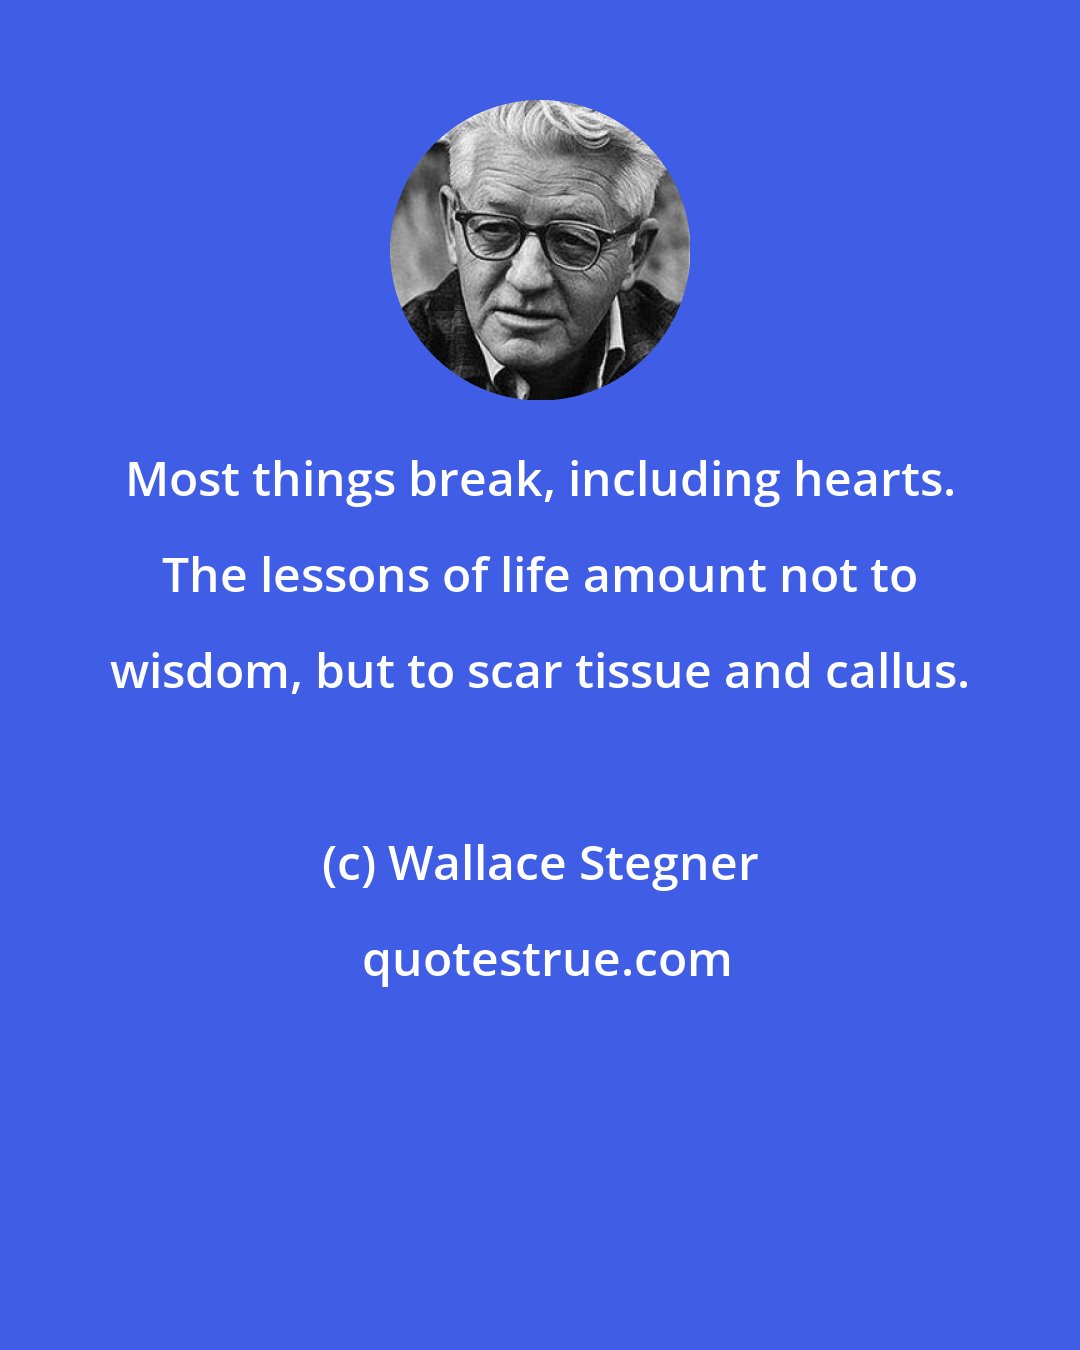 Wallace Stegner: Most things break, including hearts. The lessons of life amount not to wisdom, but to scar tissue and callus.